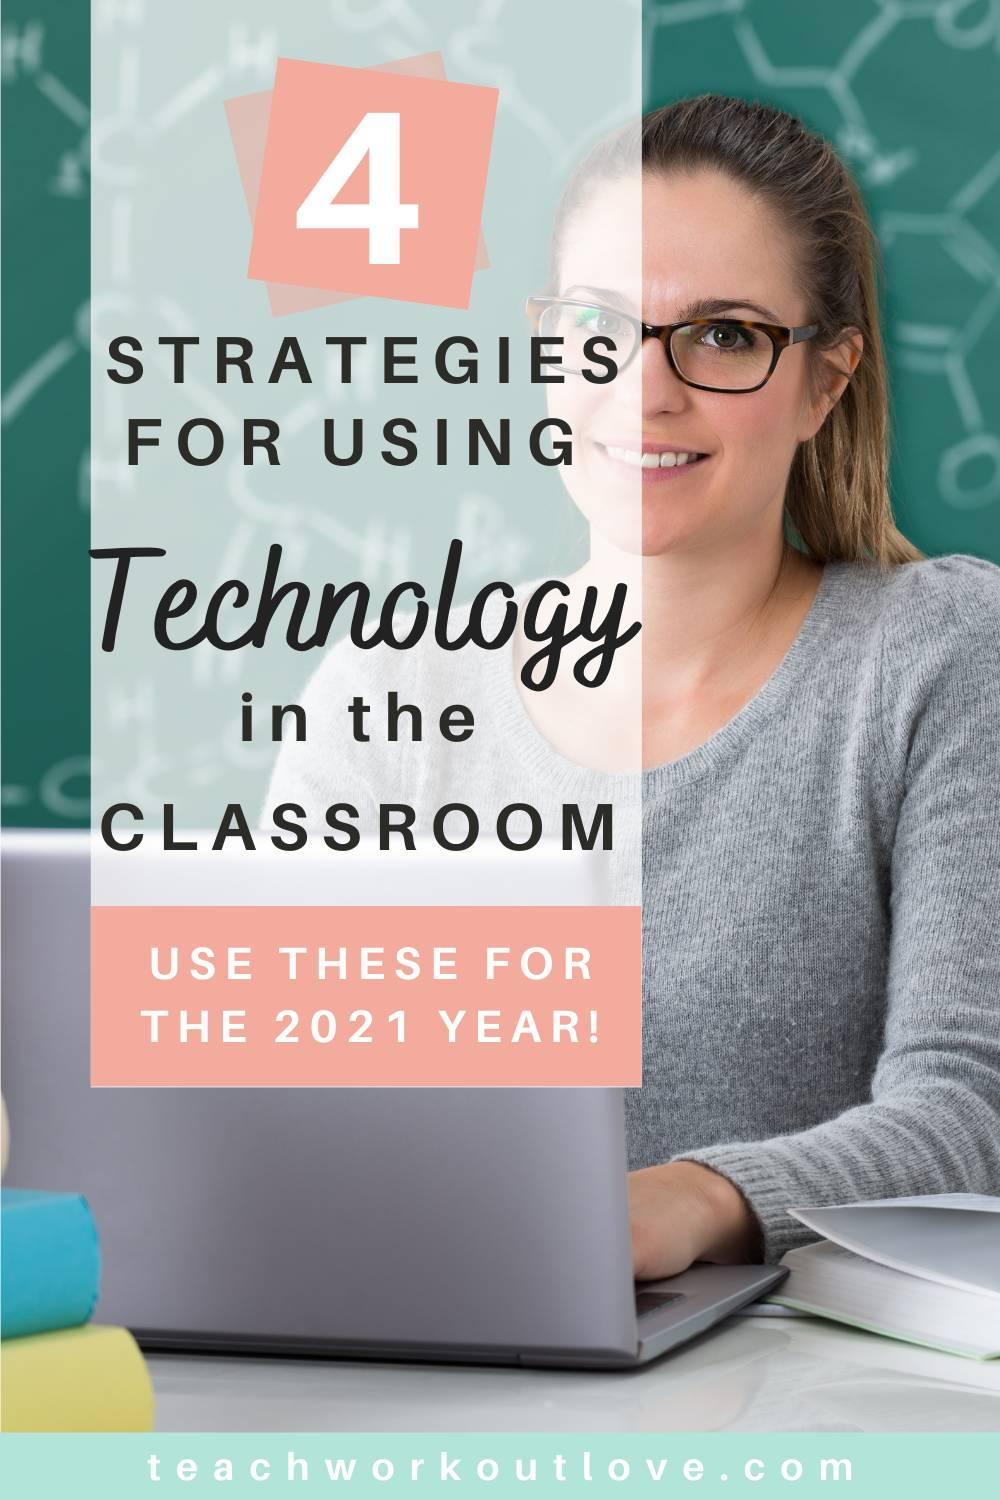 Strategies, tips, and Technology help to succeed in the classroom. Learn the best ways of How to Managing Technology Use In The Classroom.